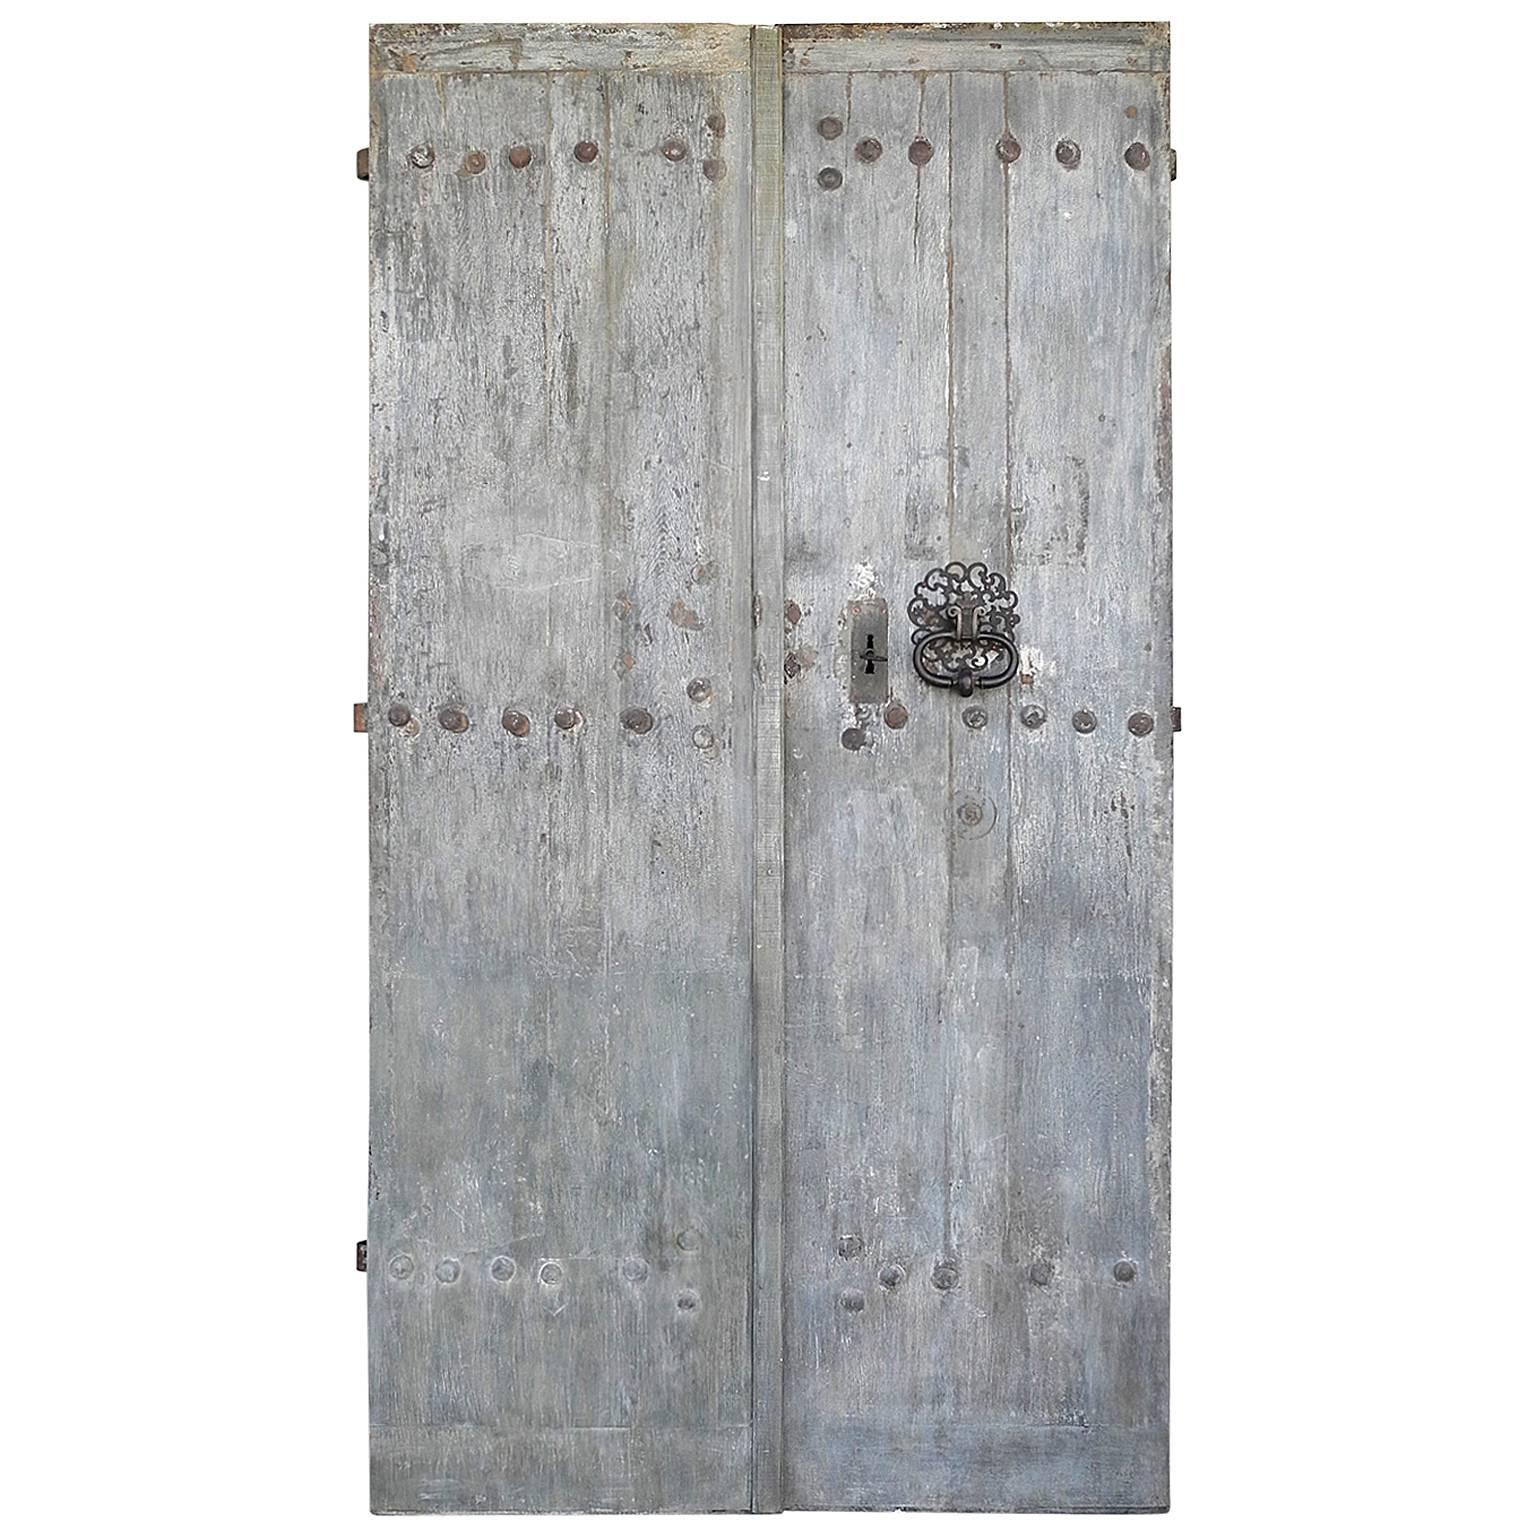 Pair of Antique Reclaimed Entrance Doors from a Bastide outside of Saint-Emilion